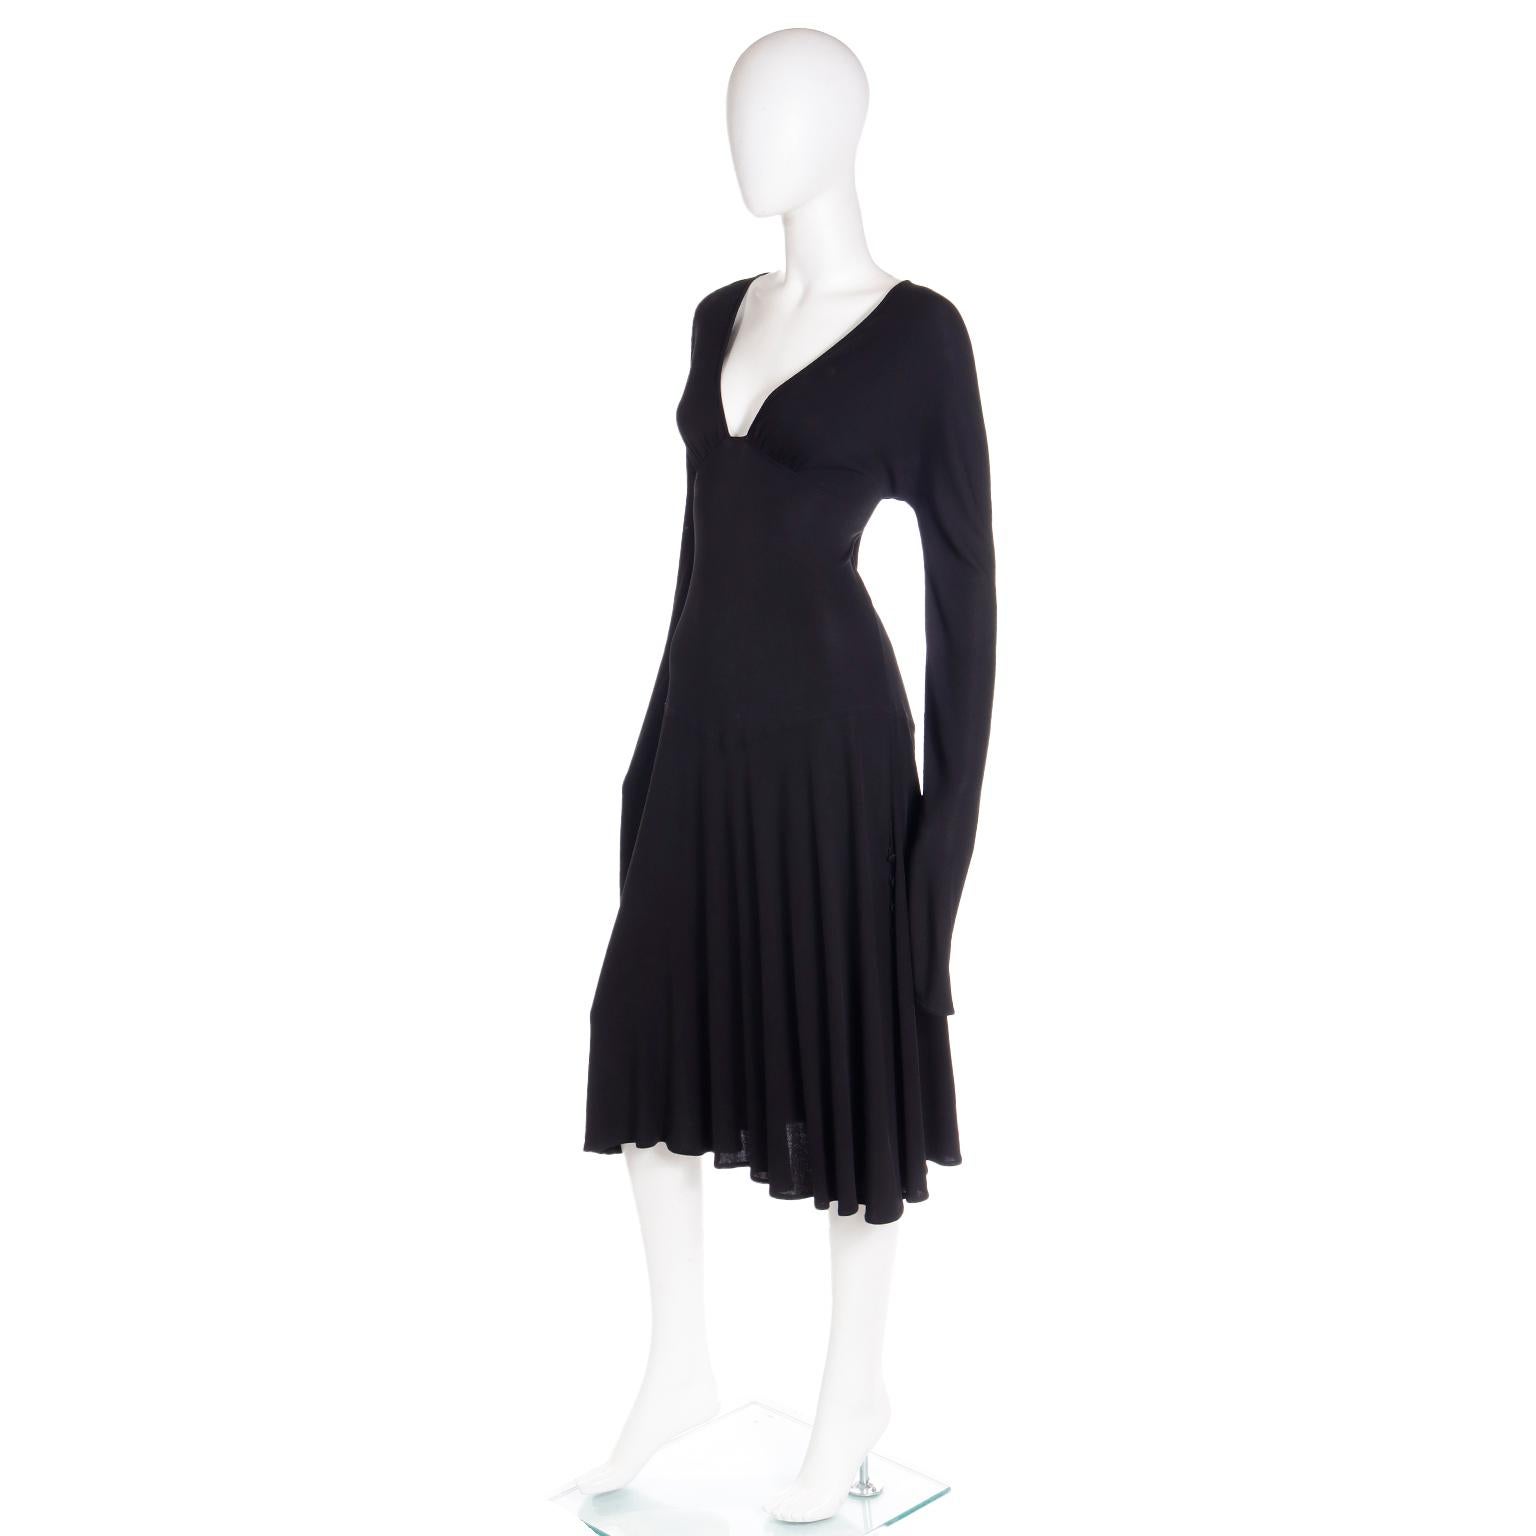 F/W 2002 Gianni Versace Vintage Black Low Plunge Evening Dress Runway Documented For Sale 3